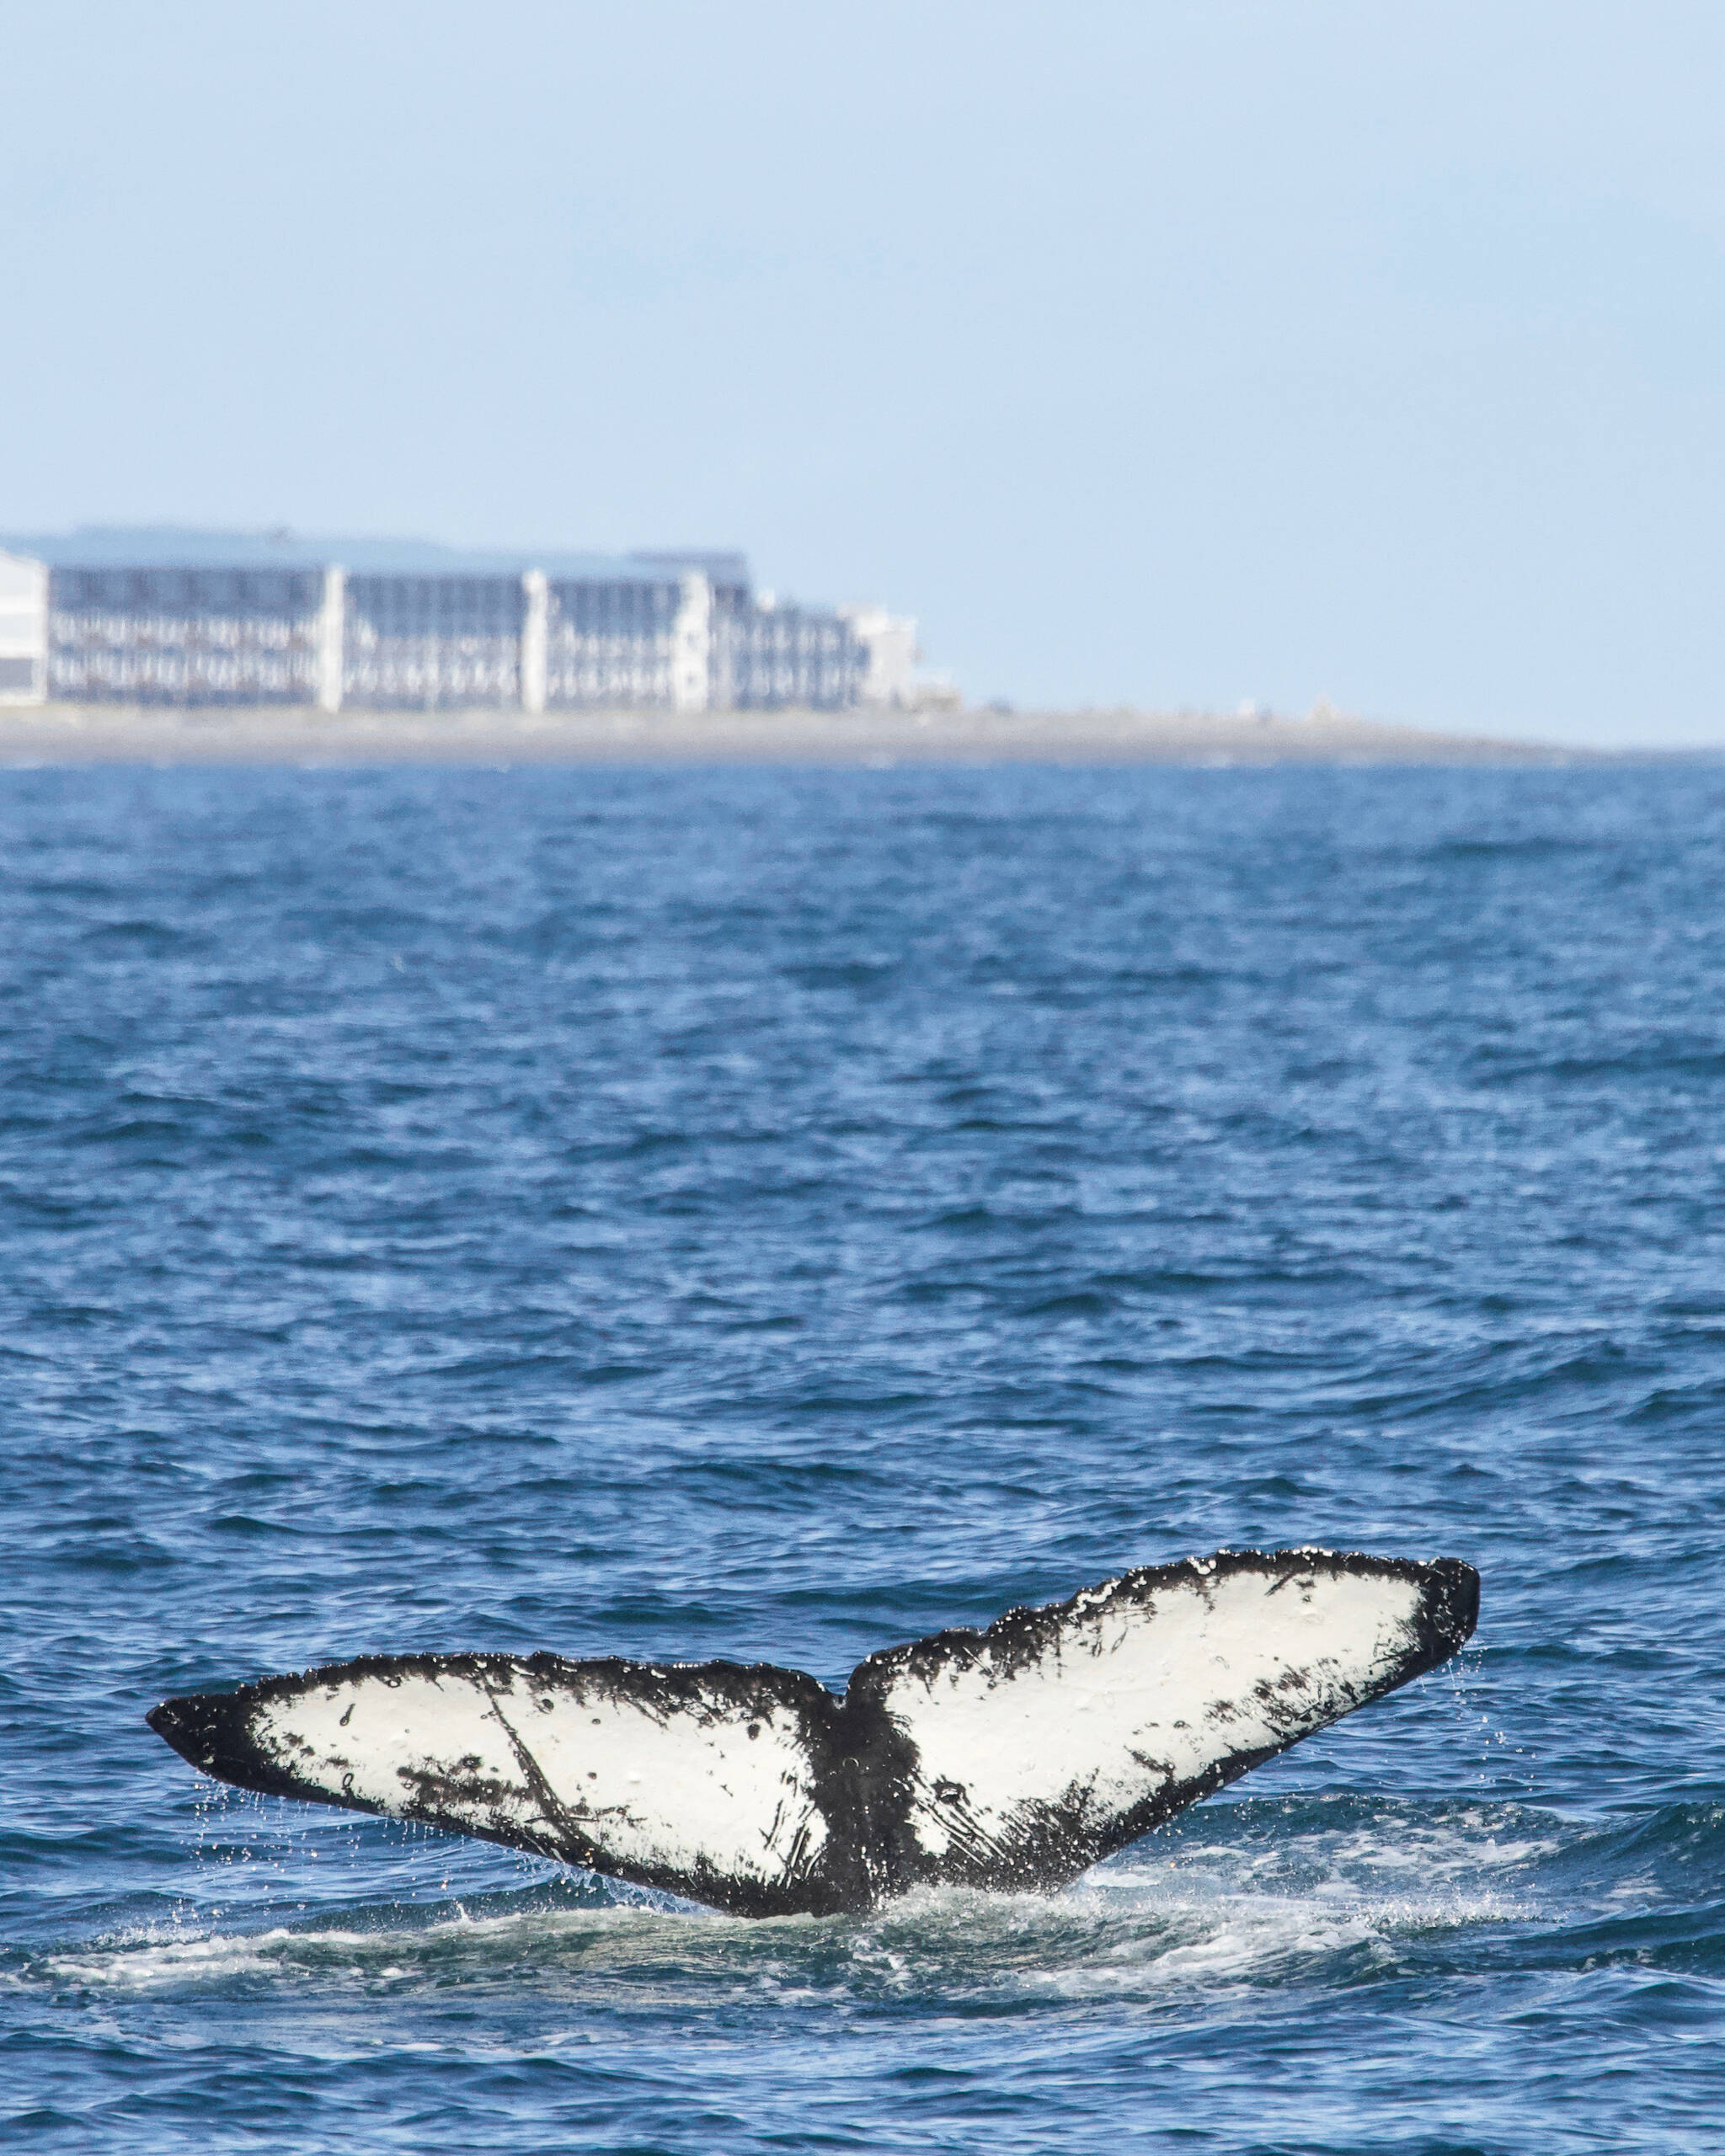 A humpback whale, Y134 Opal, dives off the Homer Spit in a photo taken August 2019. The distinctive pattern on the tail can be used to identify individual whales, and whale researchers have compiled a guide of tail patterns to help track humpback whales. (Photo by Emma Luck)